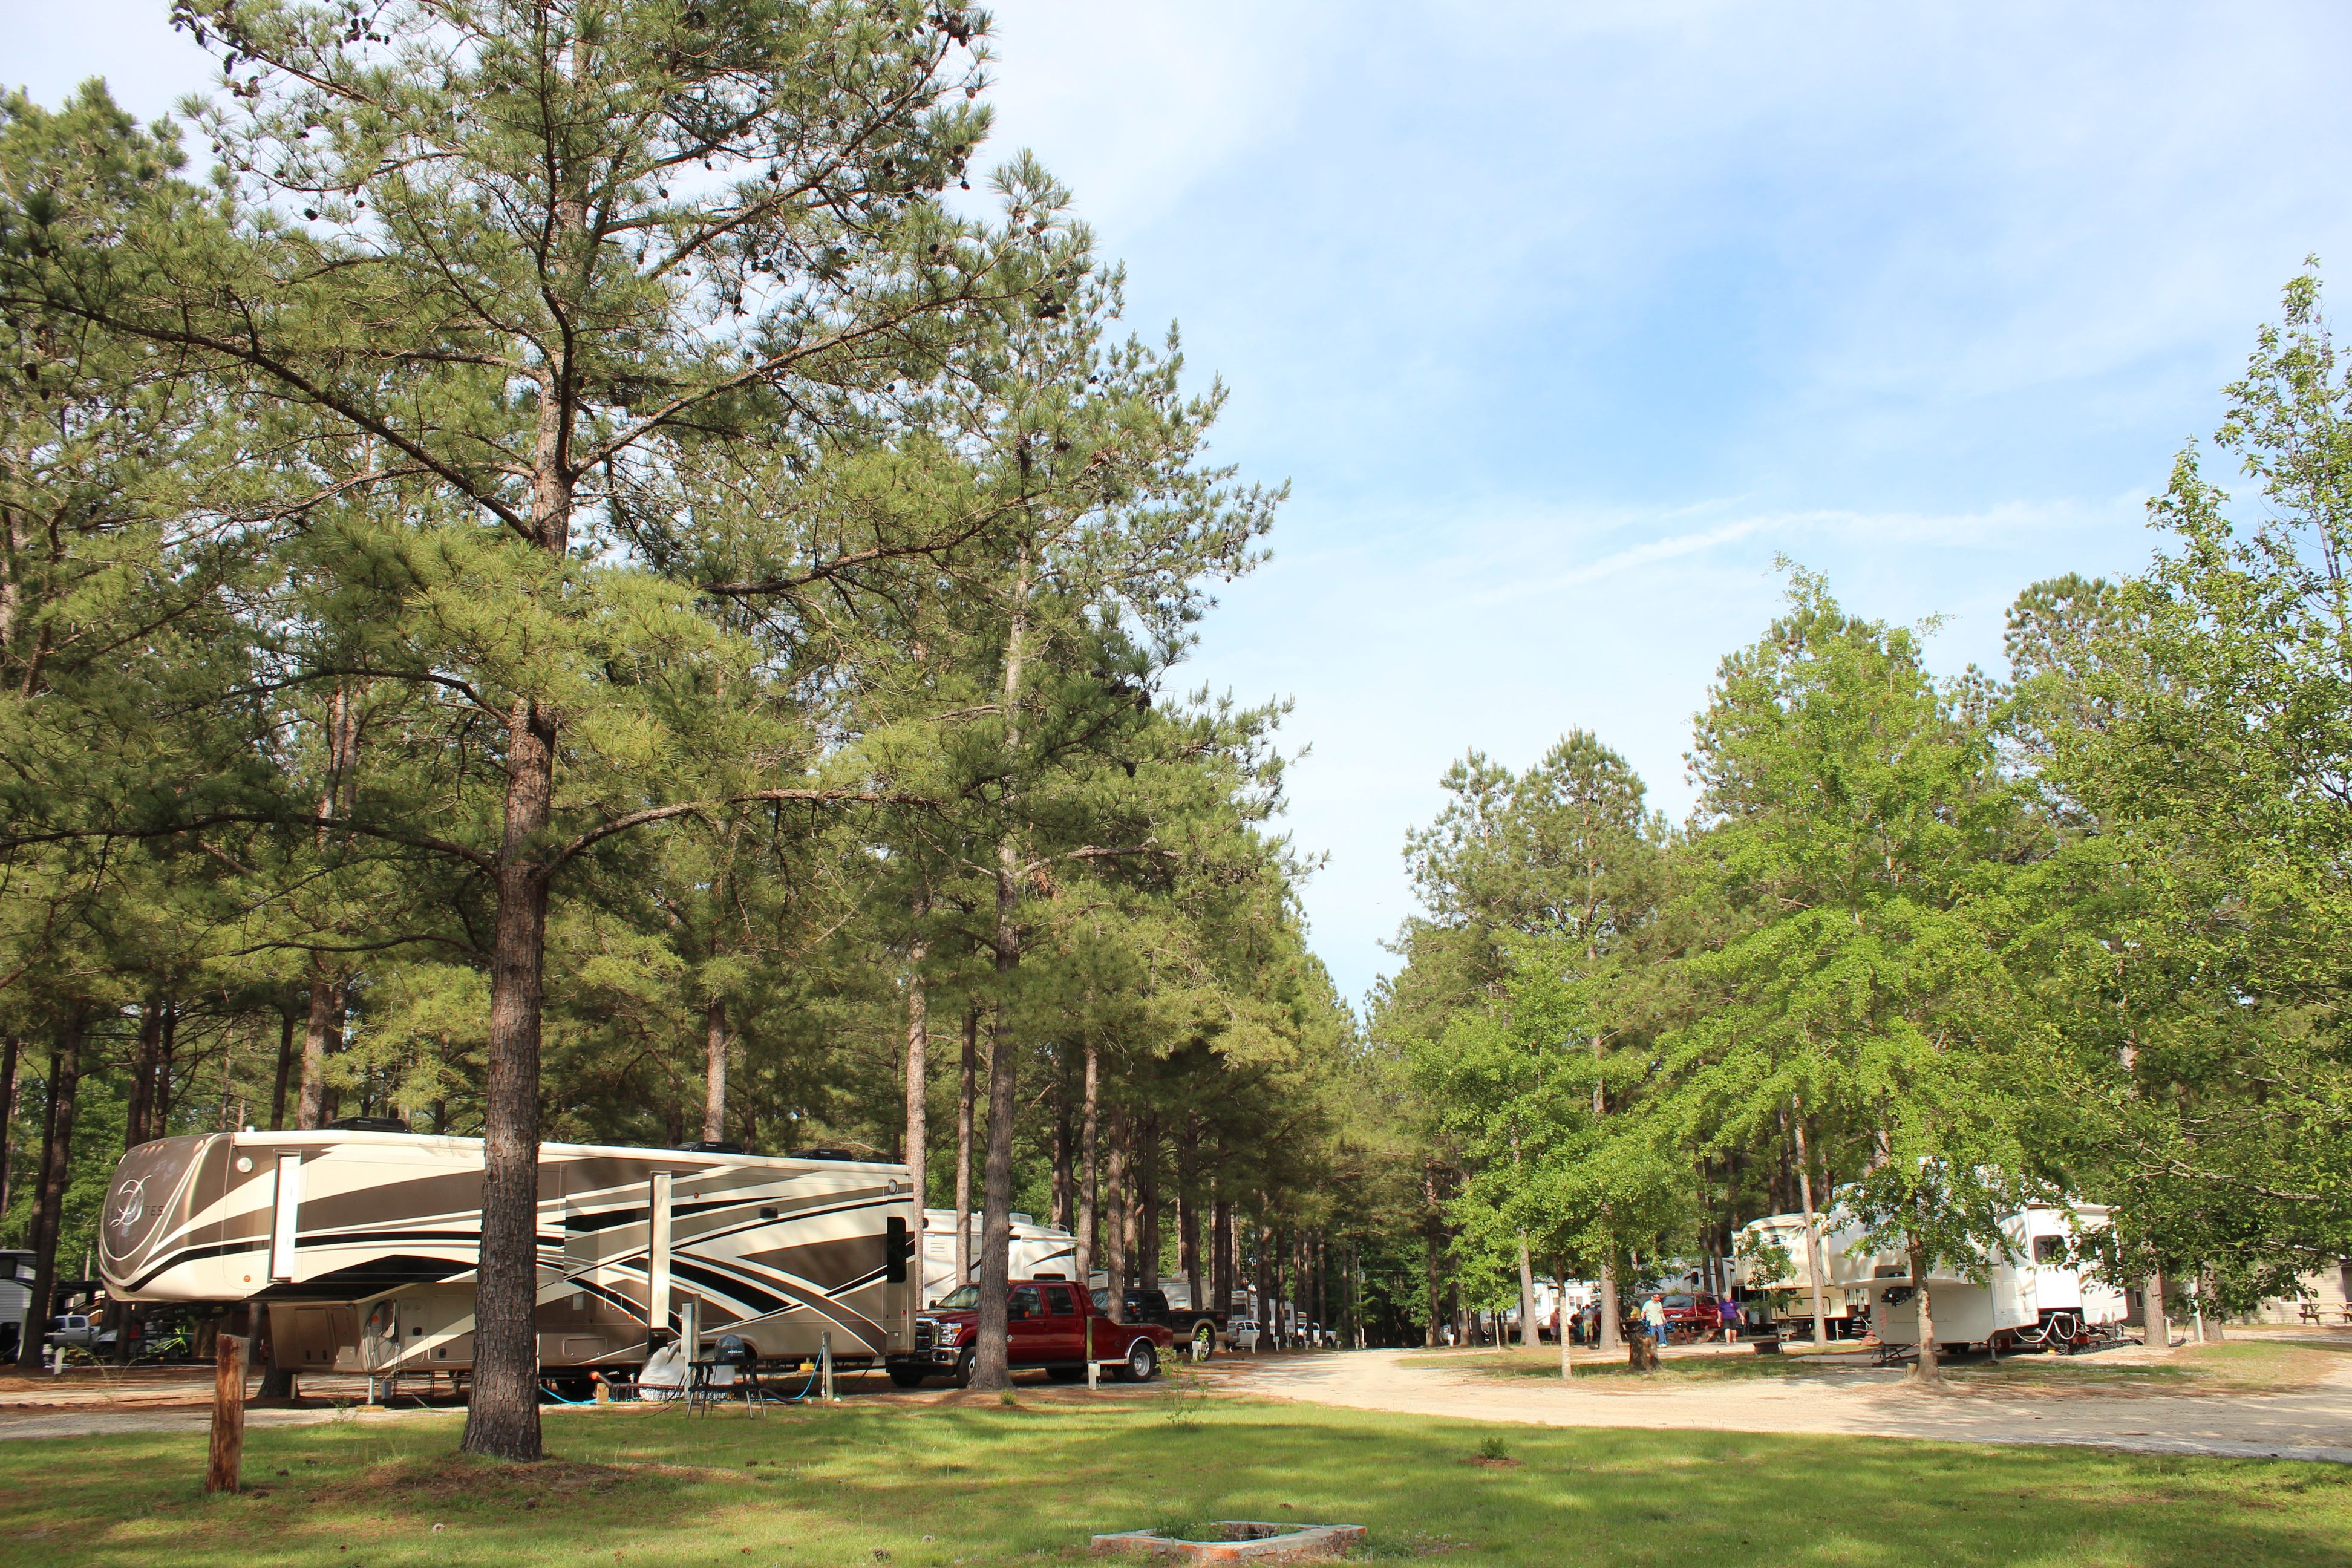 Beaver Run RV Park campground with RV's off to the side